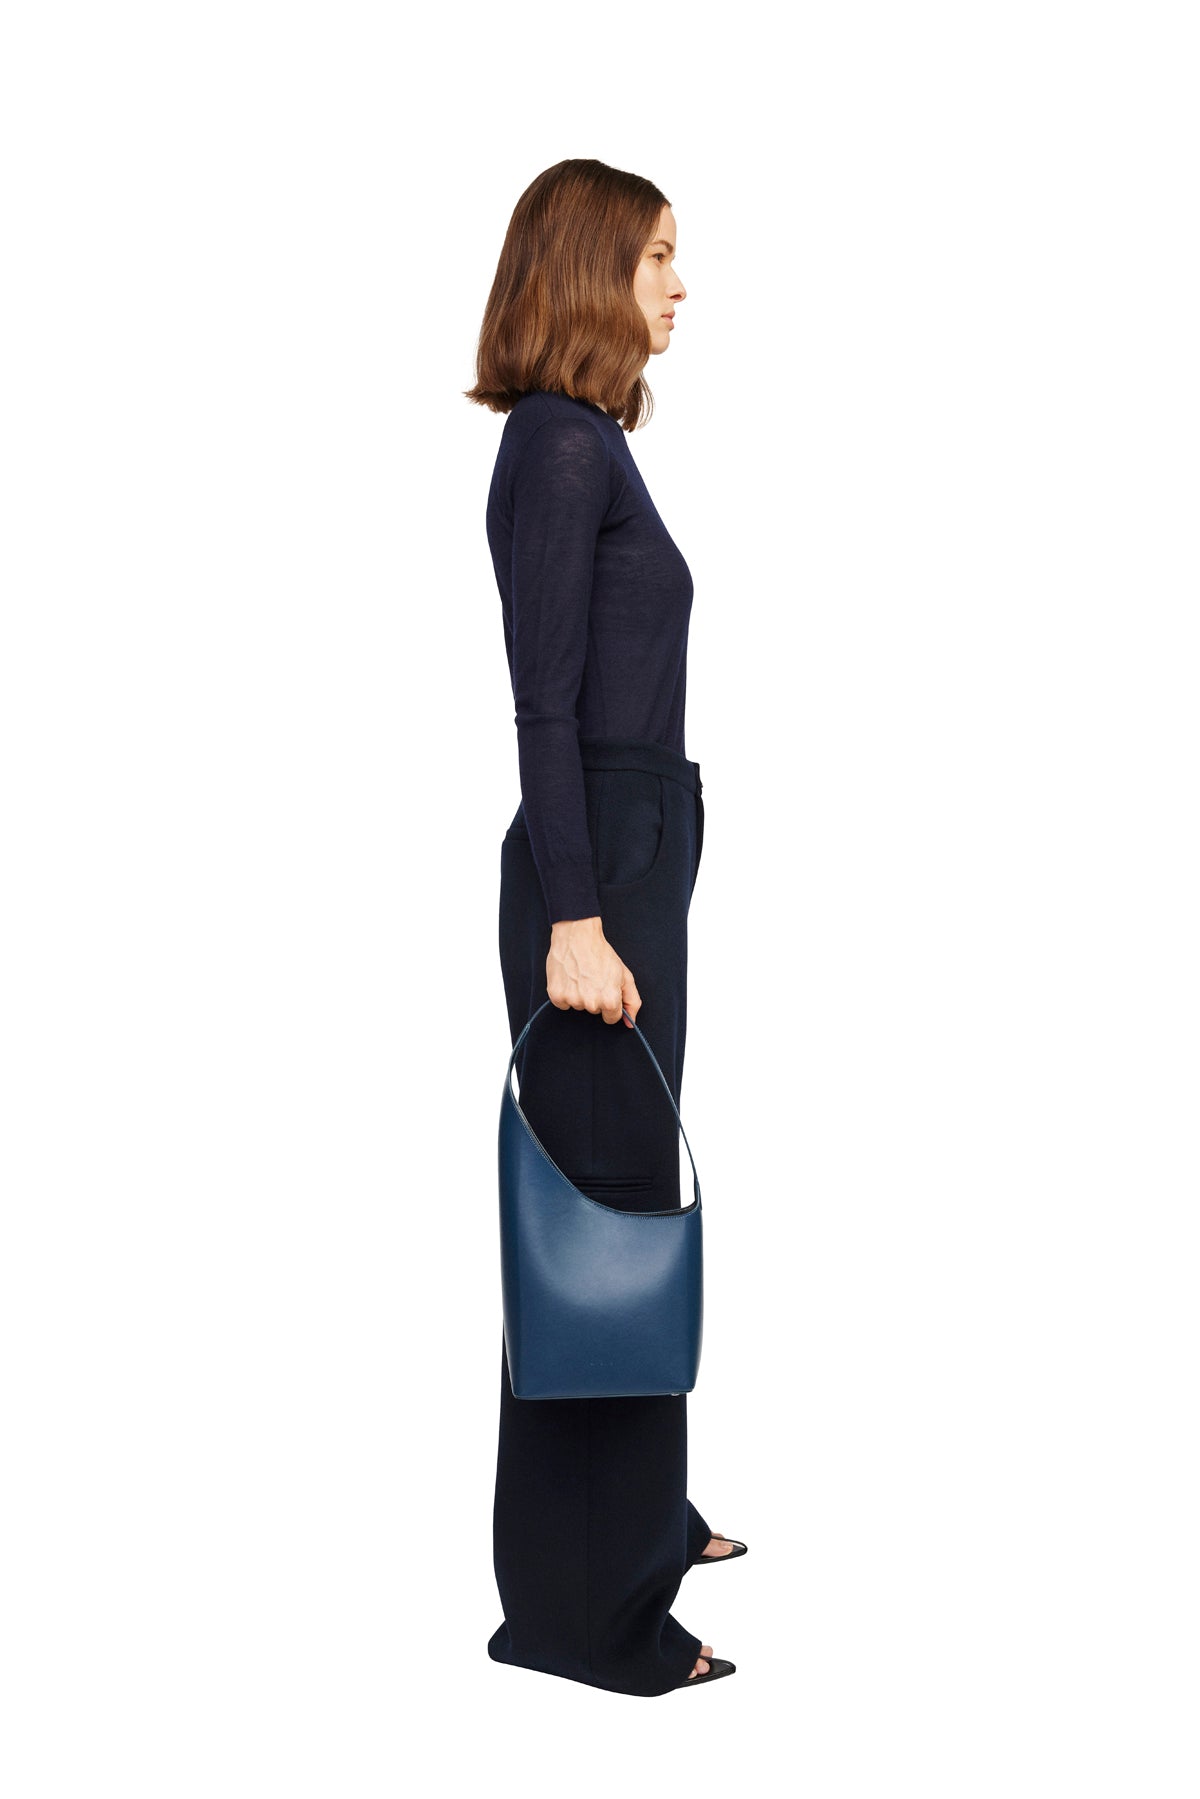 Aesther Ekme Demi Lune Leather Shoulder Bag in Blue